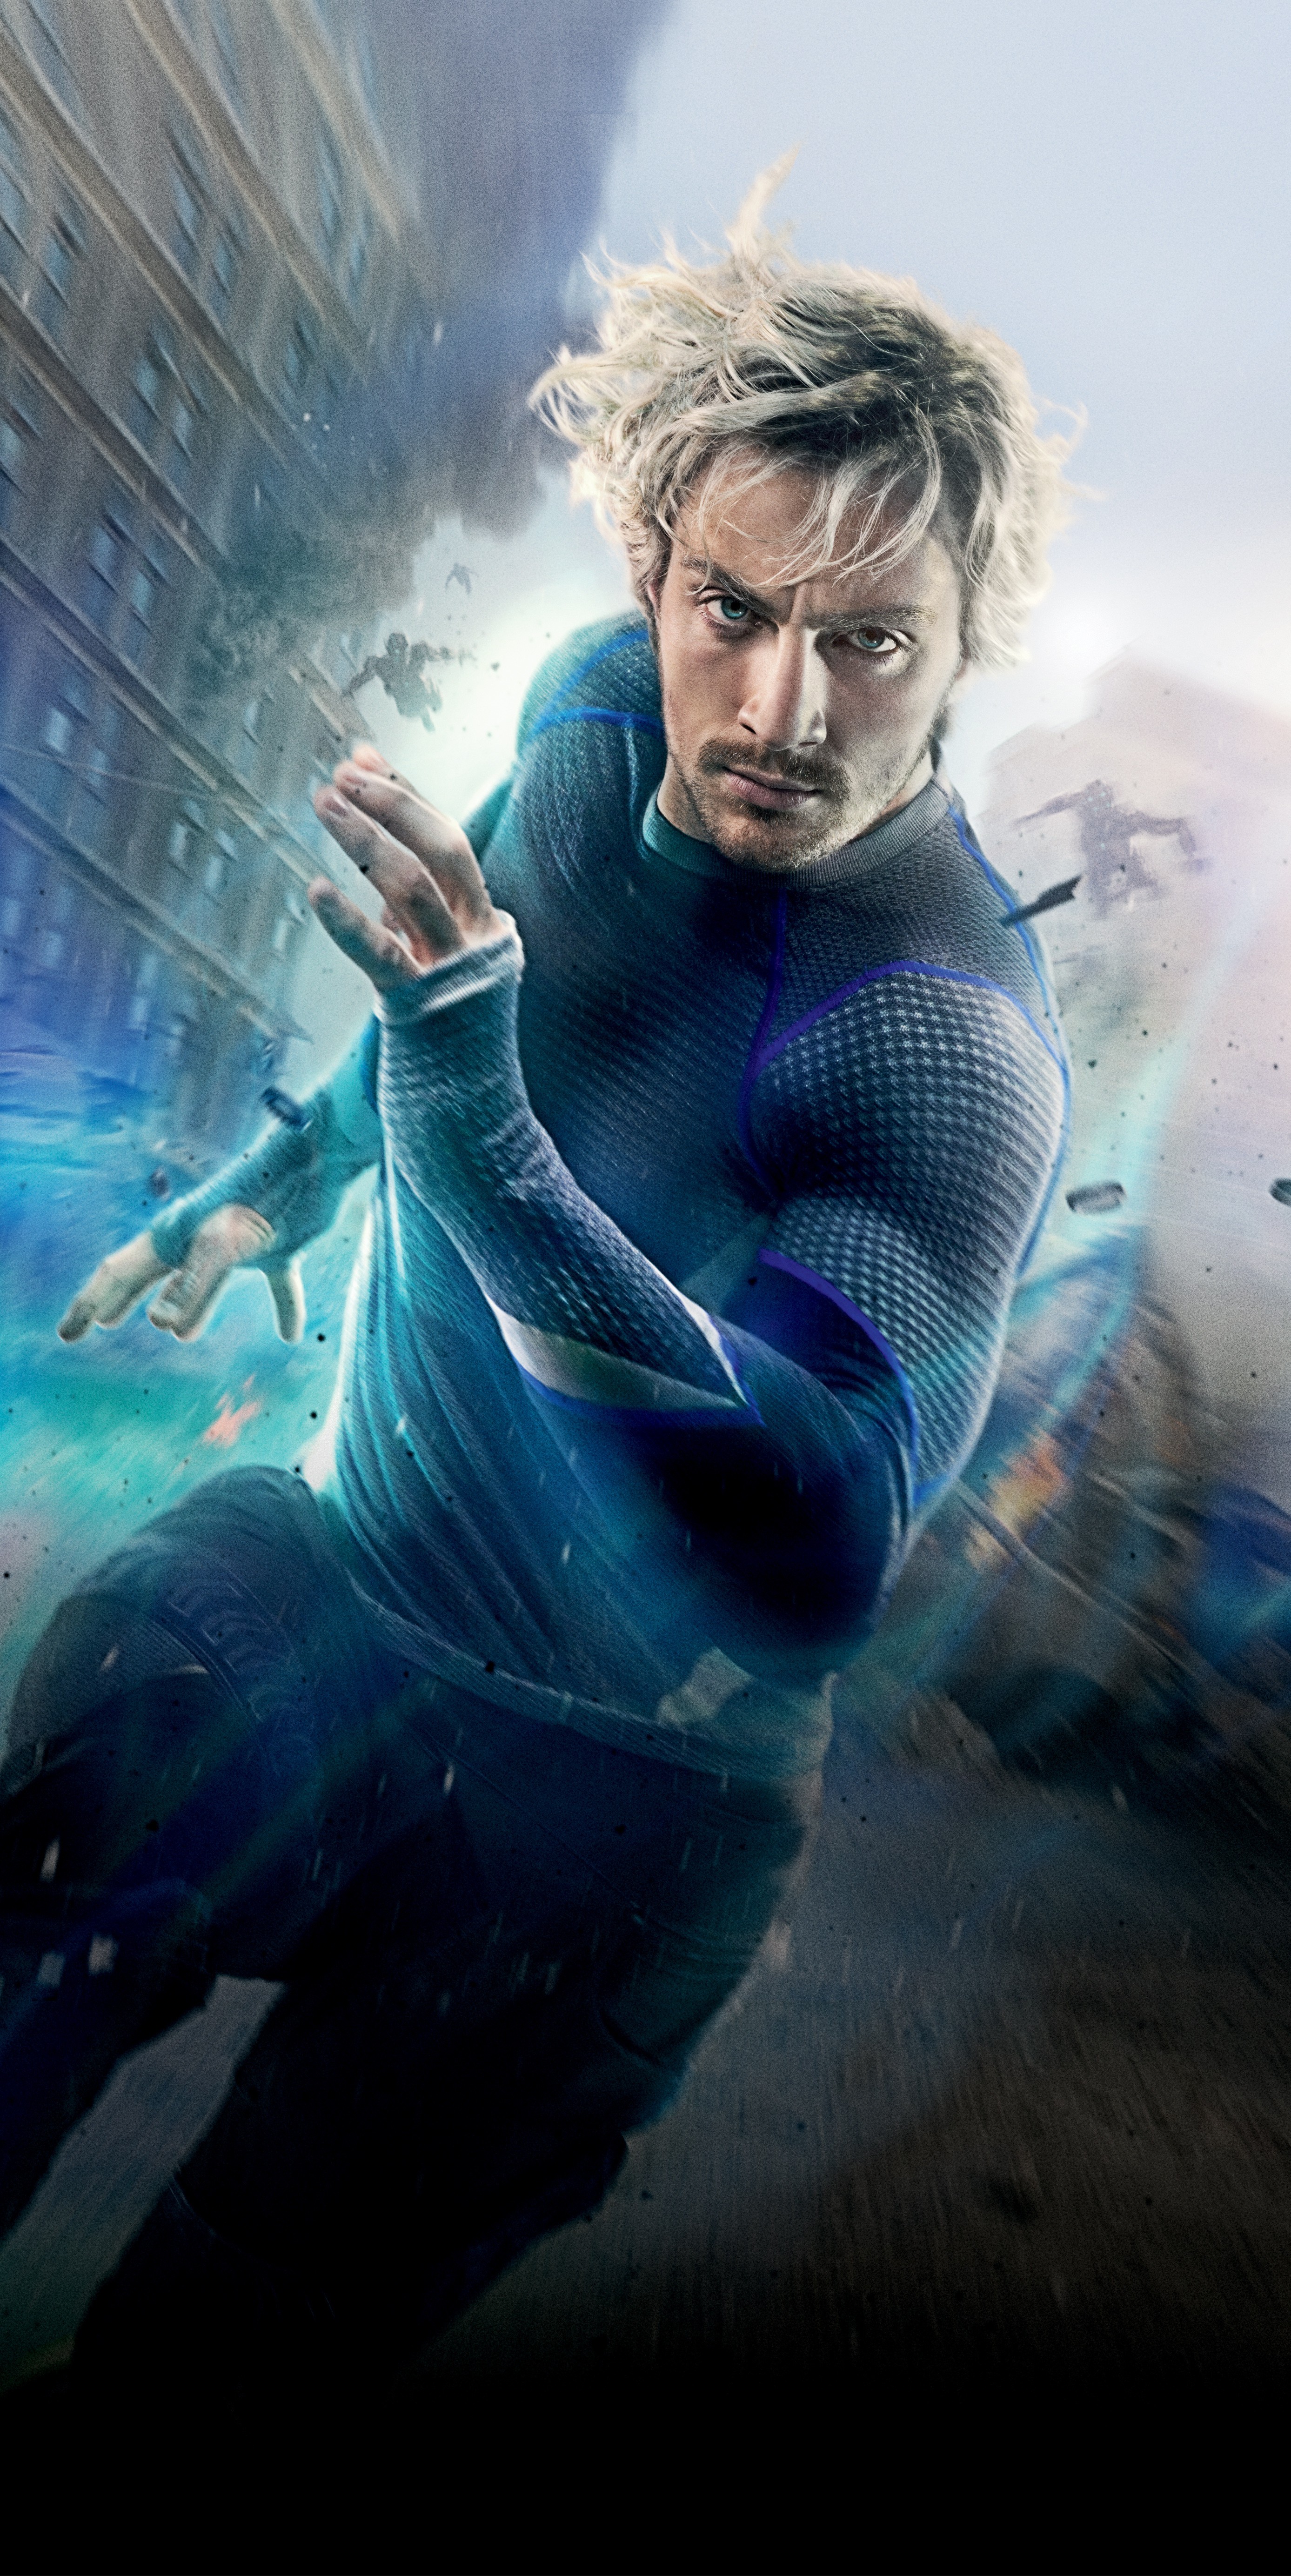 Avengers: Age of Ultron, The Avengers, Quicksilver, Aaron Taylor